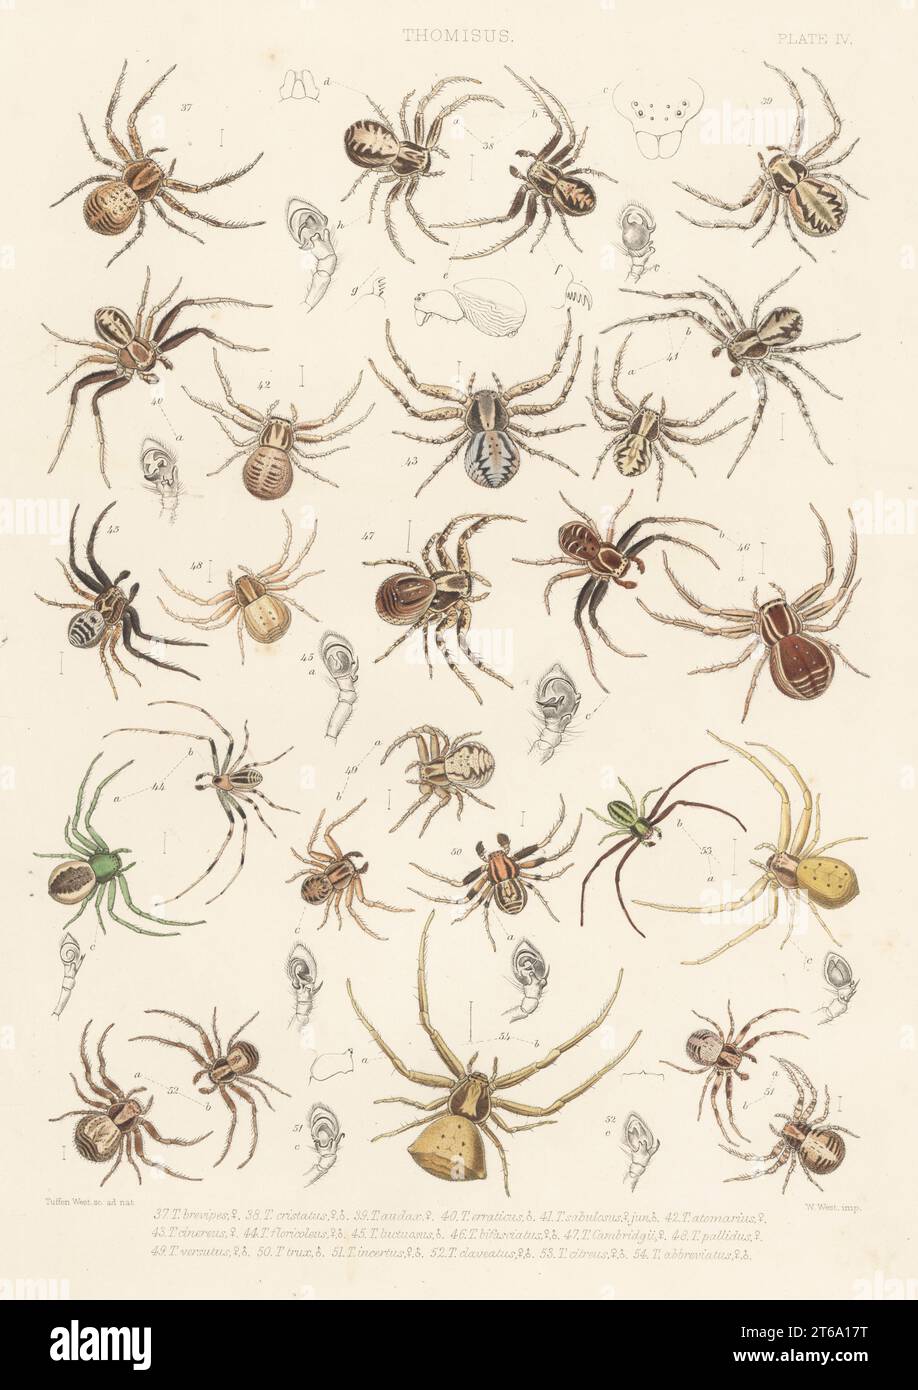 Crab spiders, Xysticus luctuosus 37, Xysticus cristatus 38, Xysticus audax 39, Xysticus erraticus 40, Xysticus sabulosus 41, Tmarus piger 42, Xysticus sabulosus 43, Diaea dorsata 44, Xysticus luctuosus 45, Xysticus bifasciatus 46, Xysticus luctator 47, Ozyptila atomaria 48, Ozyptila atomaria 49, Ozyptila trux 50, Ozyptila praticola 51, Ozyptila blackwalli 52, Misumena vatia 53, and Thomisus onustus 54. Handcoloured lithograph by W. West after Tuffen West from John Blackwalls A History of the Spiders of Great Britain and Ireland, Ray Society, London, 1861. Stock Photo